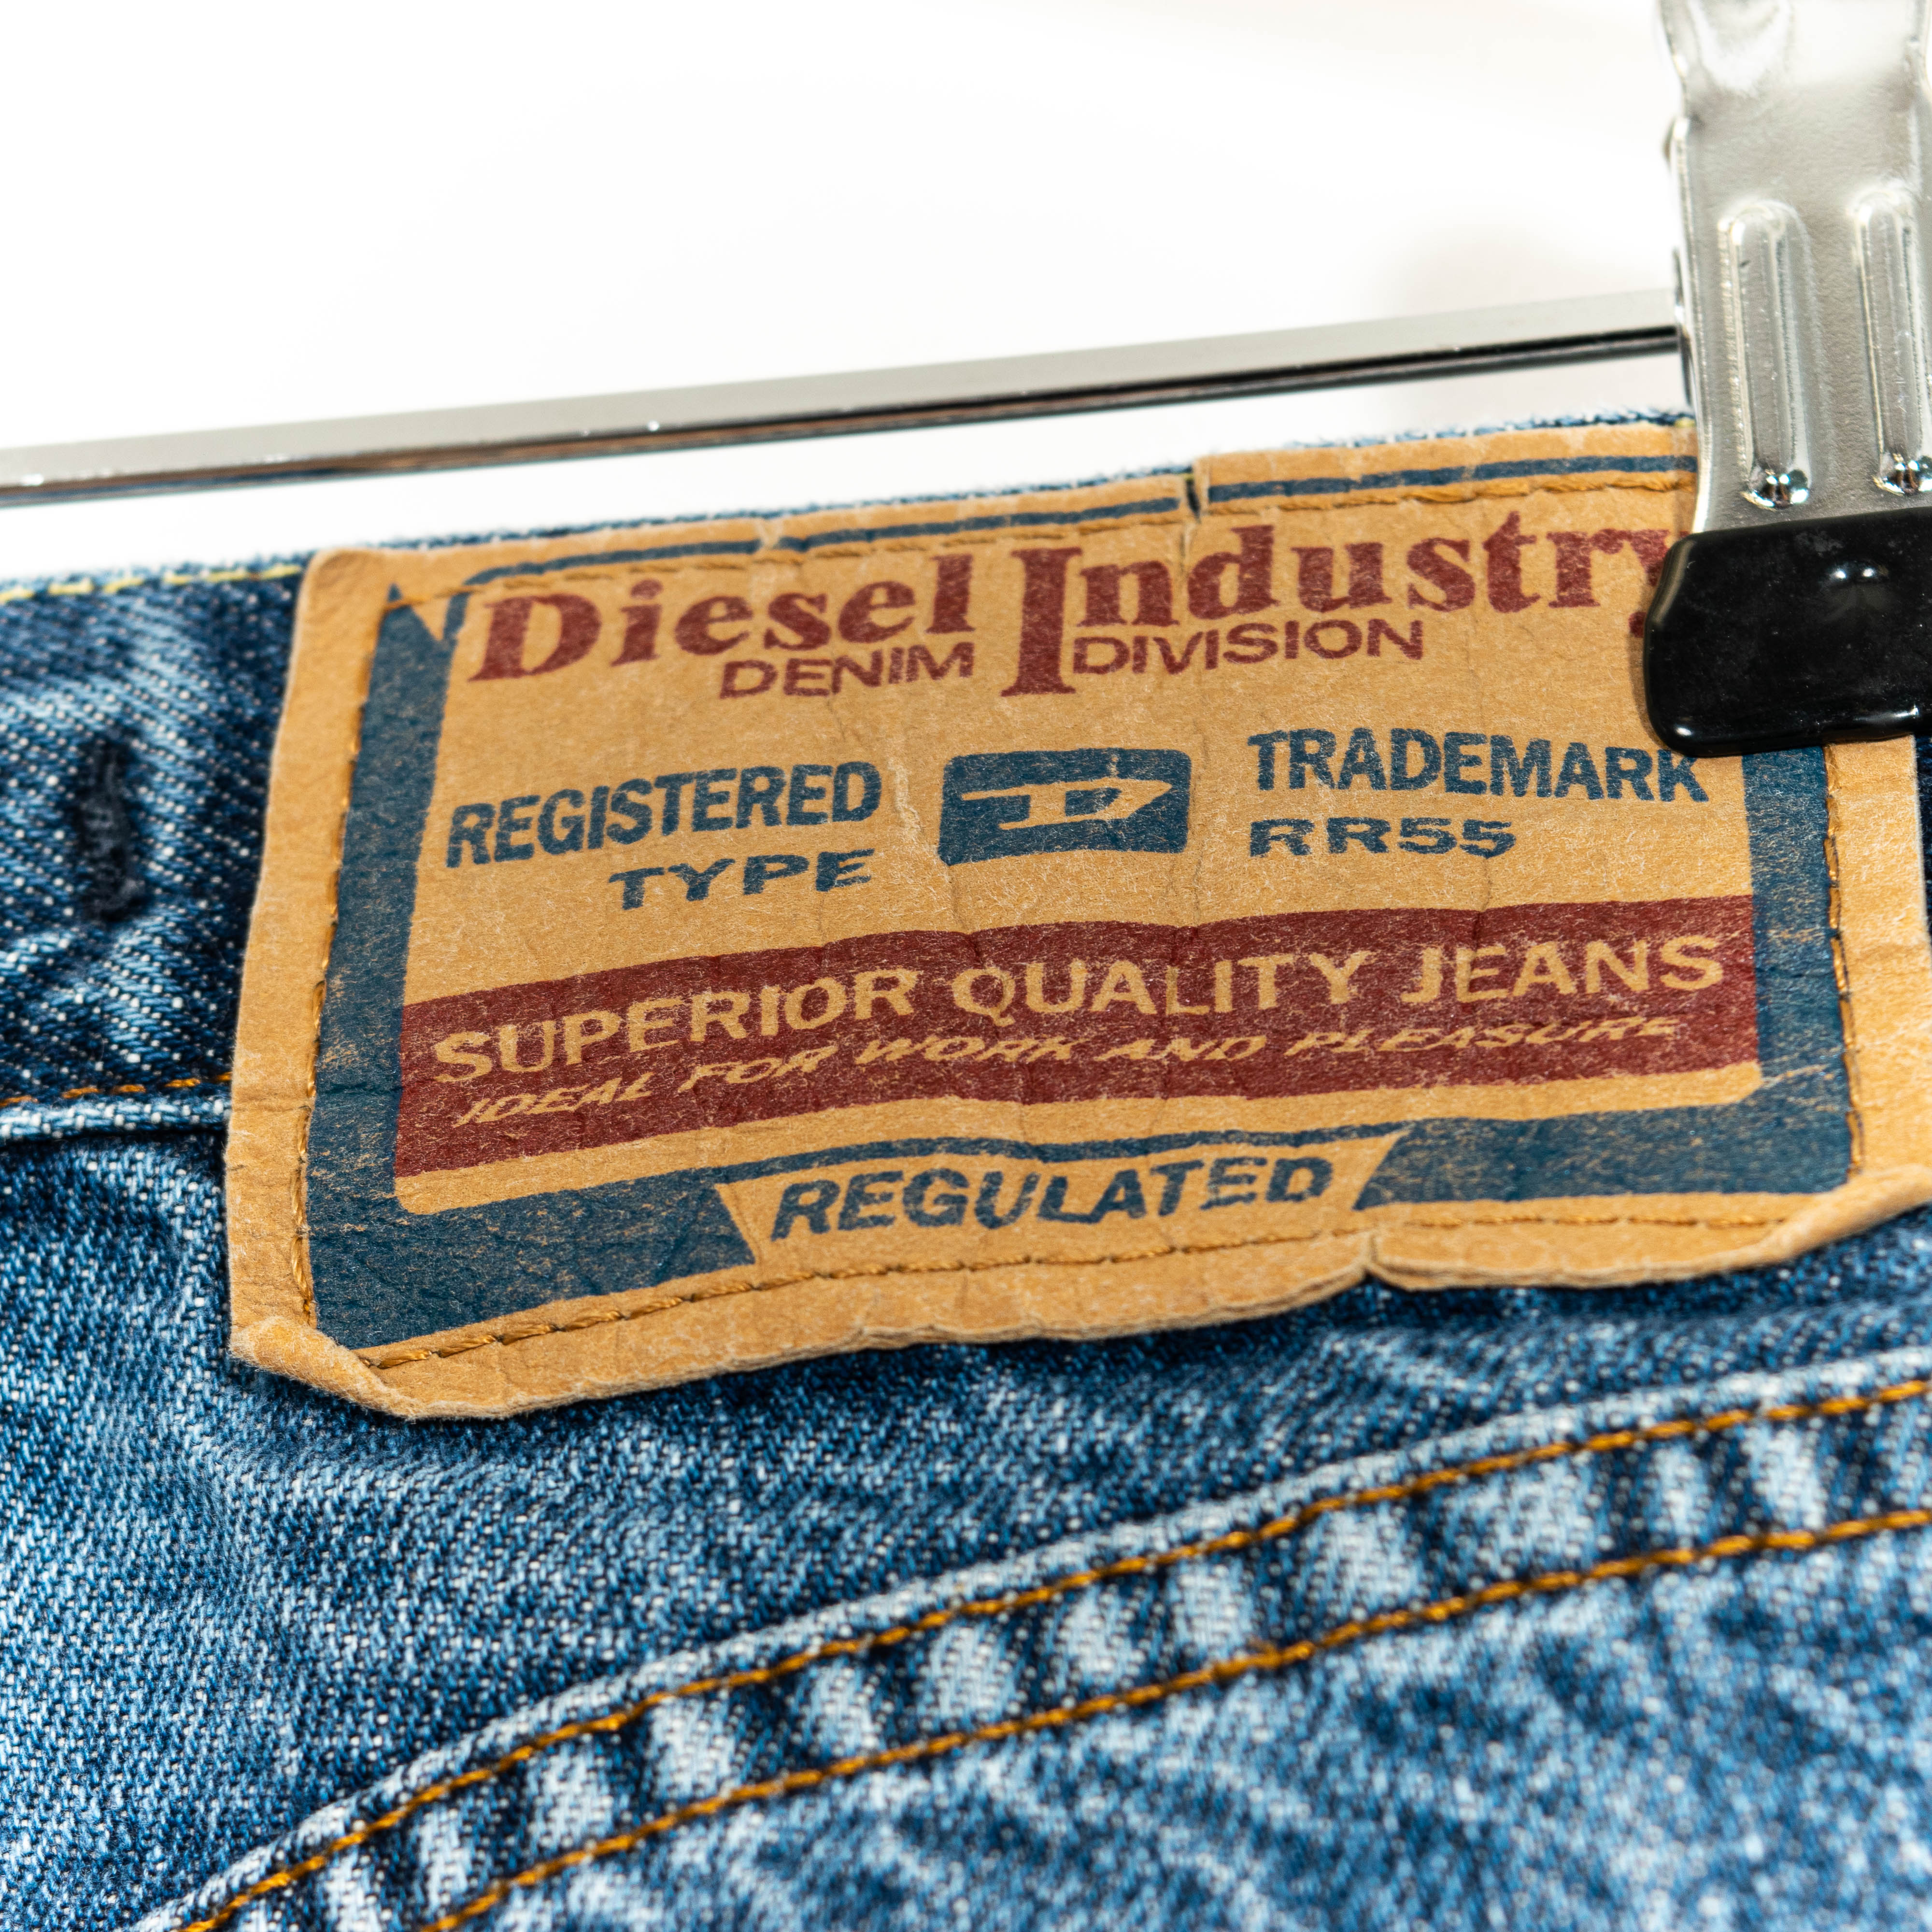 Diesel Industry Medium Washed Straight Leg Button Fly Jeans Mens US32